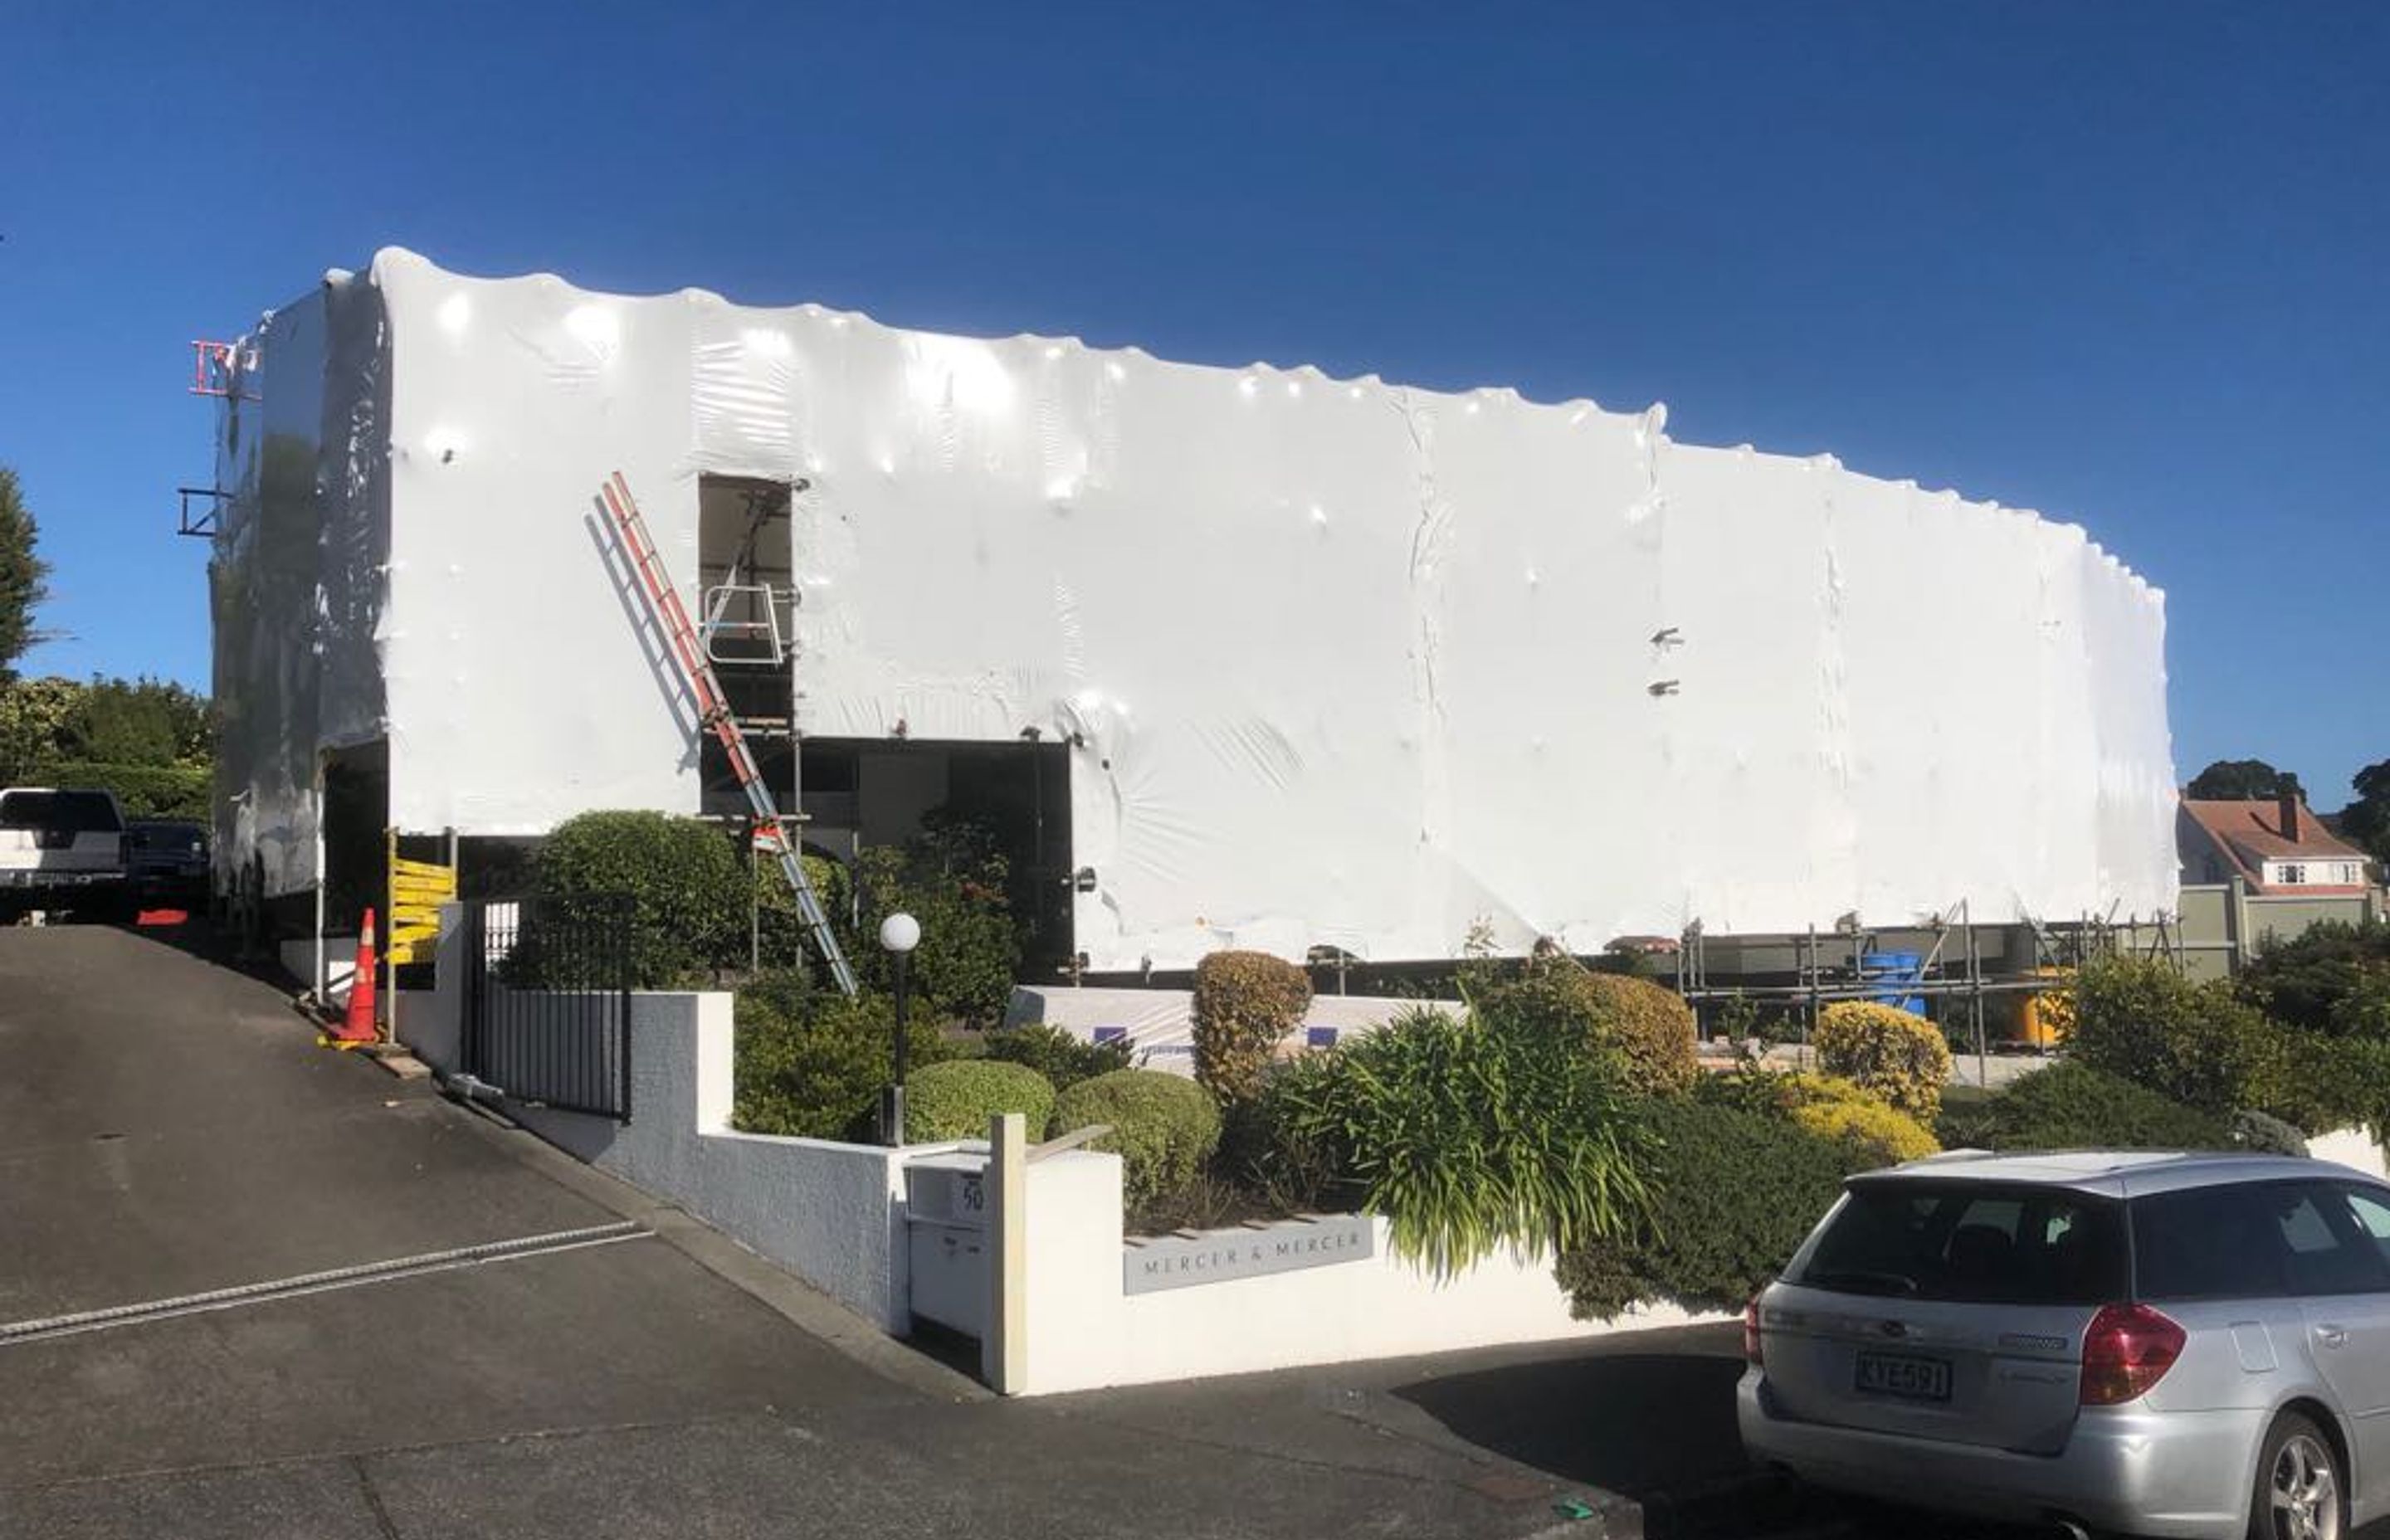 Shrink wrapping has become the industry standard on large-scale renovations and new builds in the residential sector and has been shown to expedite completion of a project by up to 20 per cent.